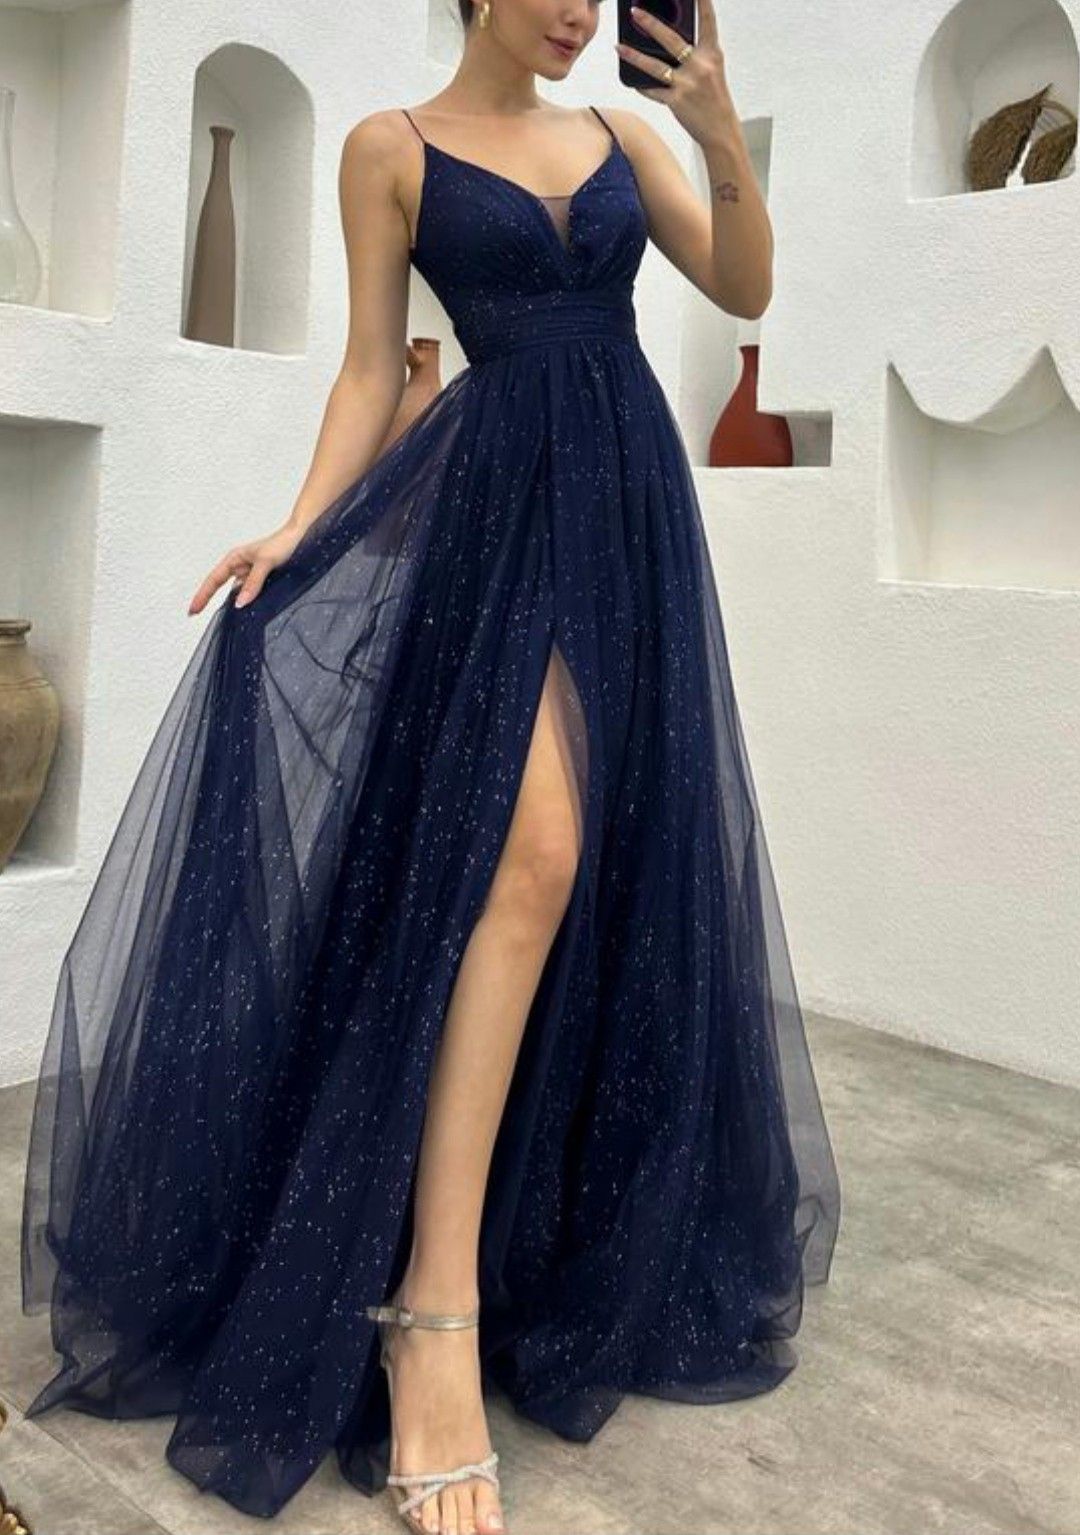 How to Wear Midnight Blue Dress: Best 15 Beautiful Outfit Ideas for Women